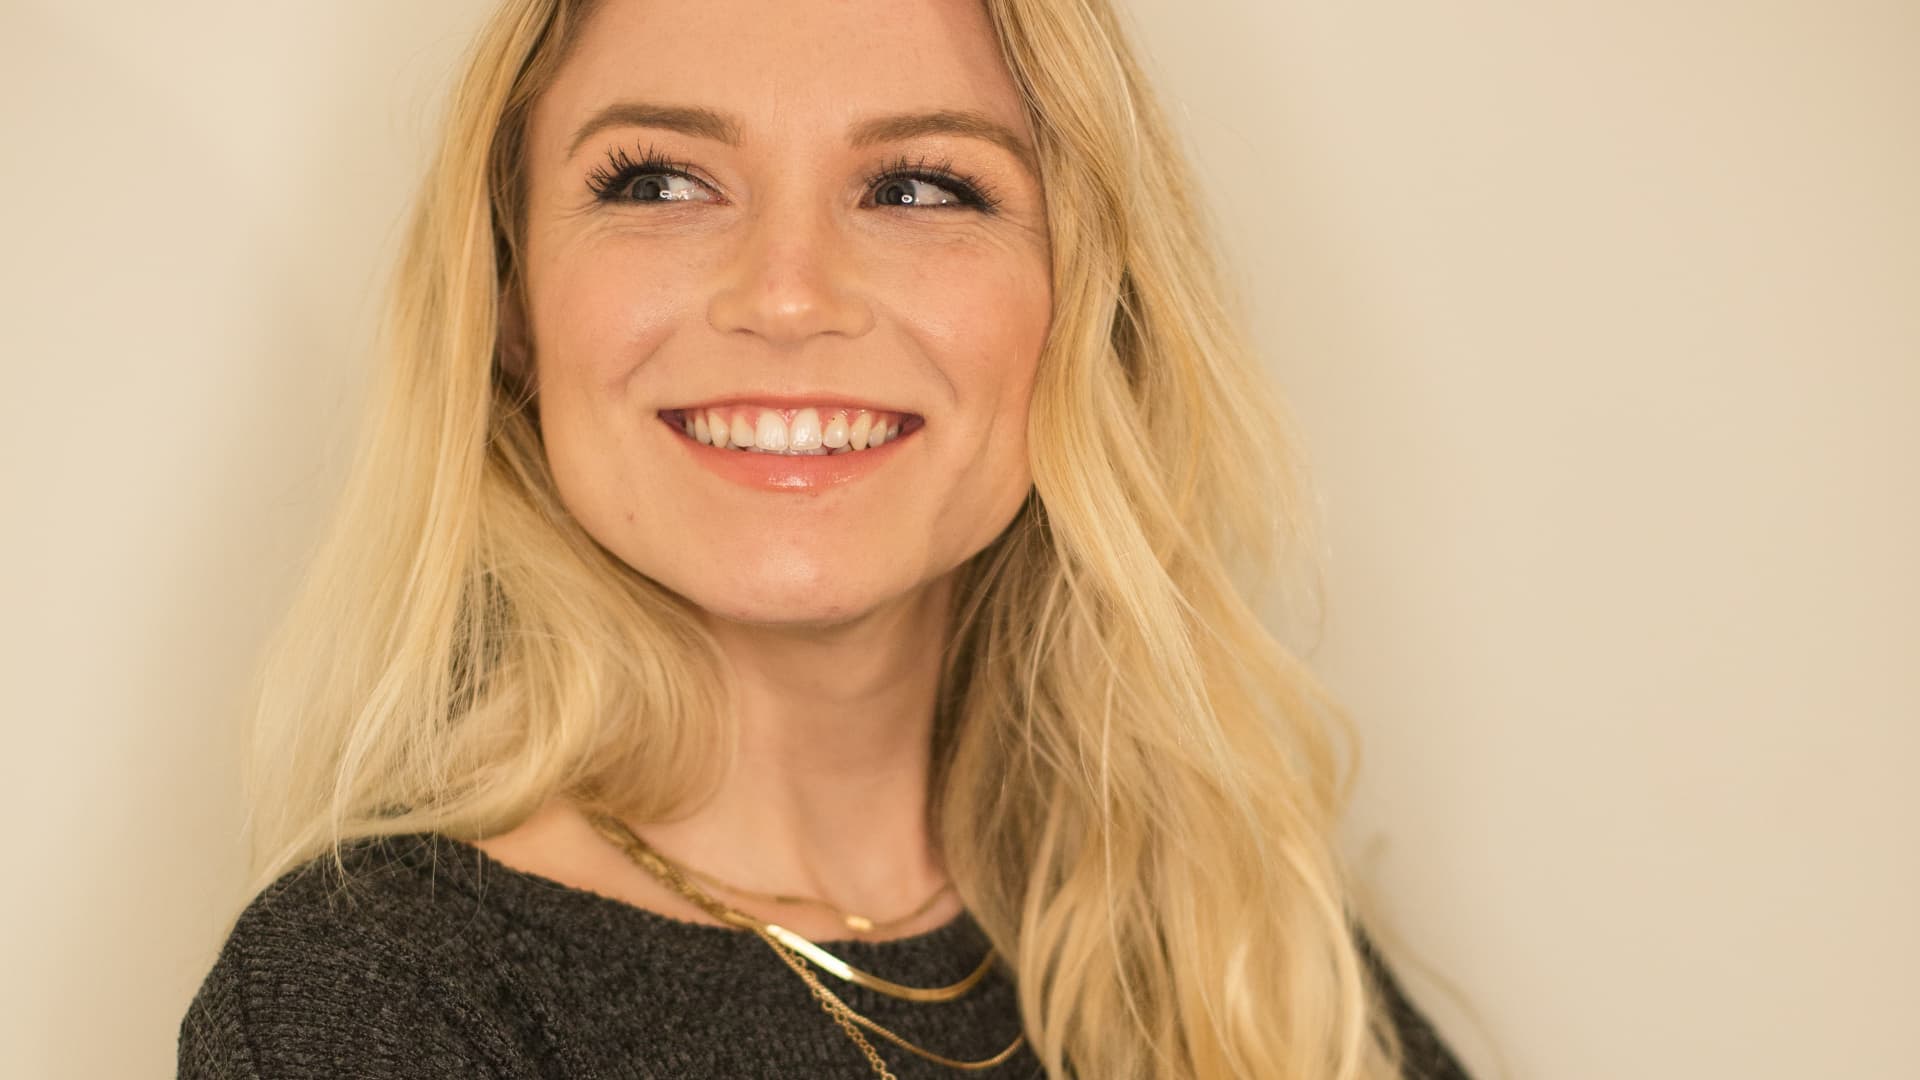 Kayla Kilbride, 24, began investing in crypto earlier this year.